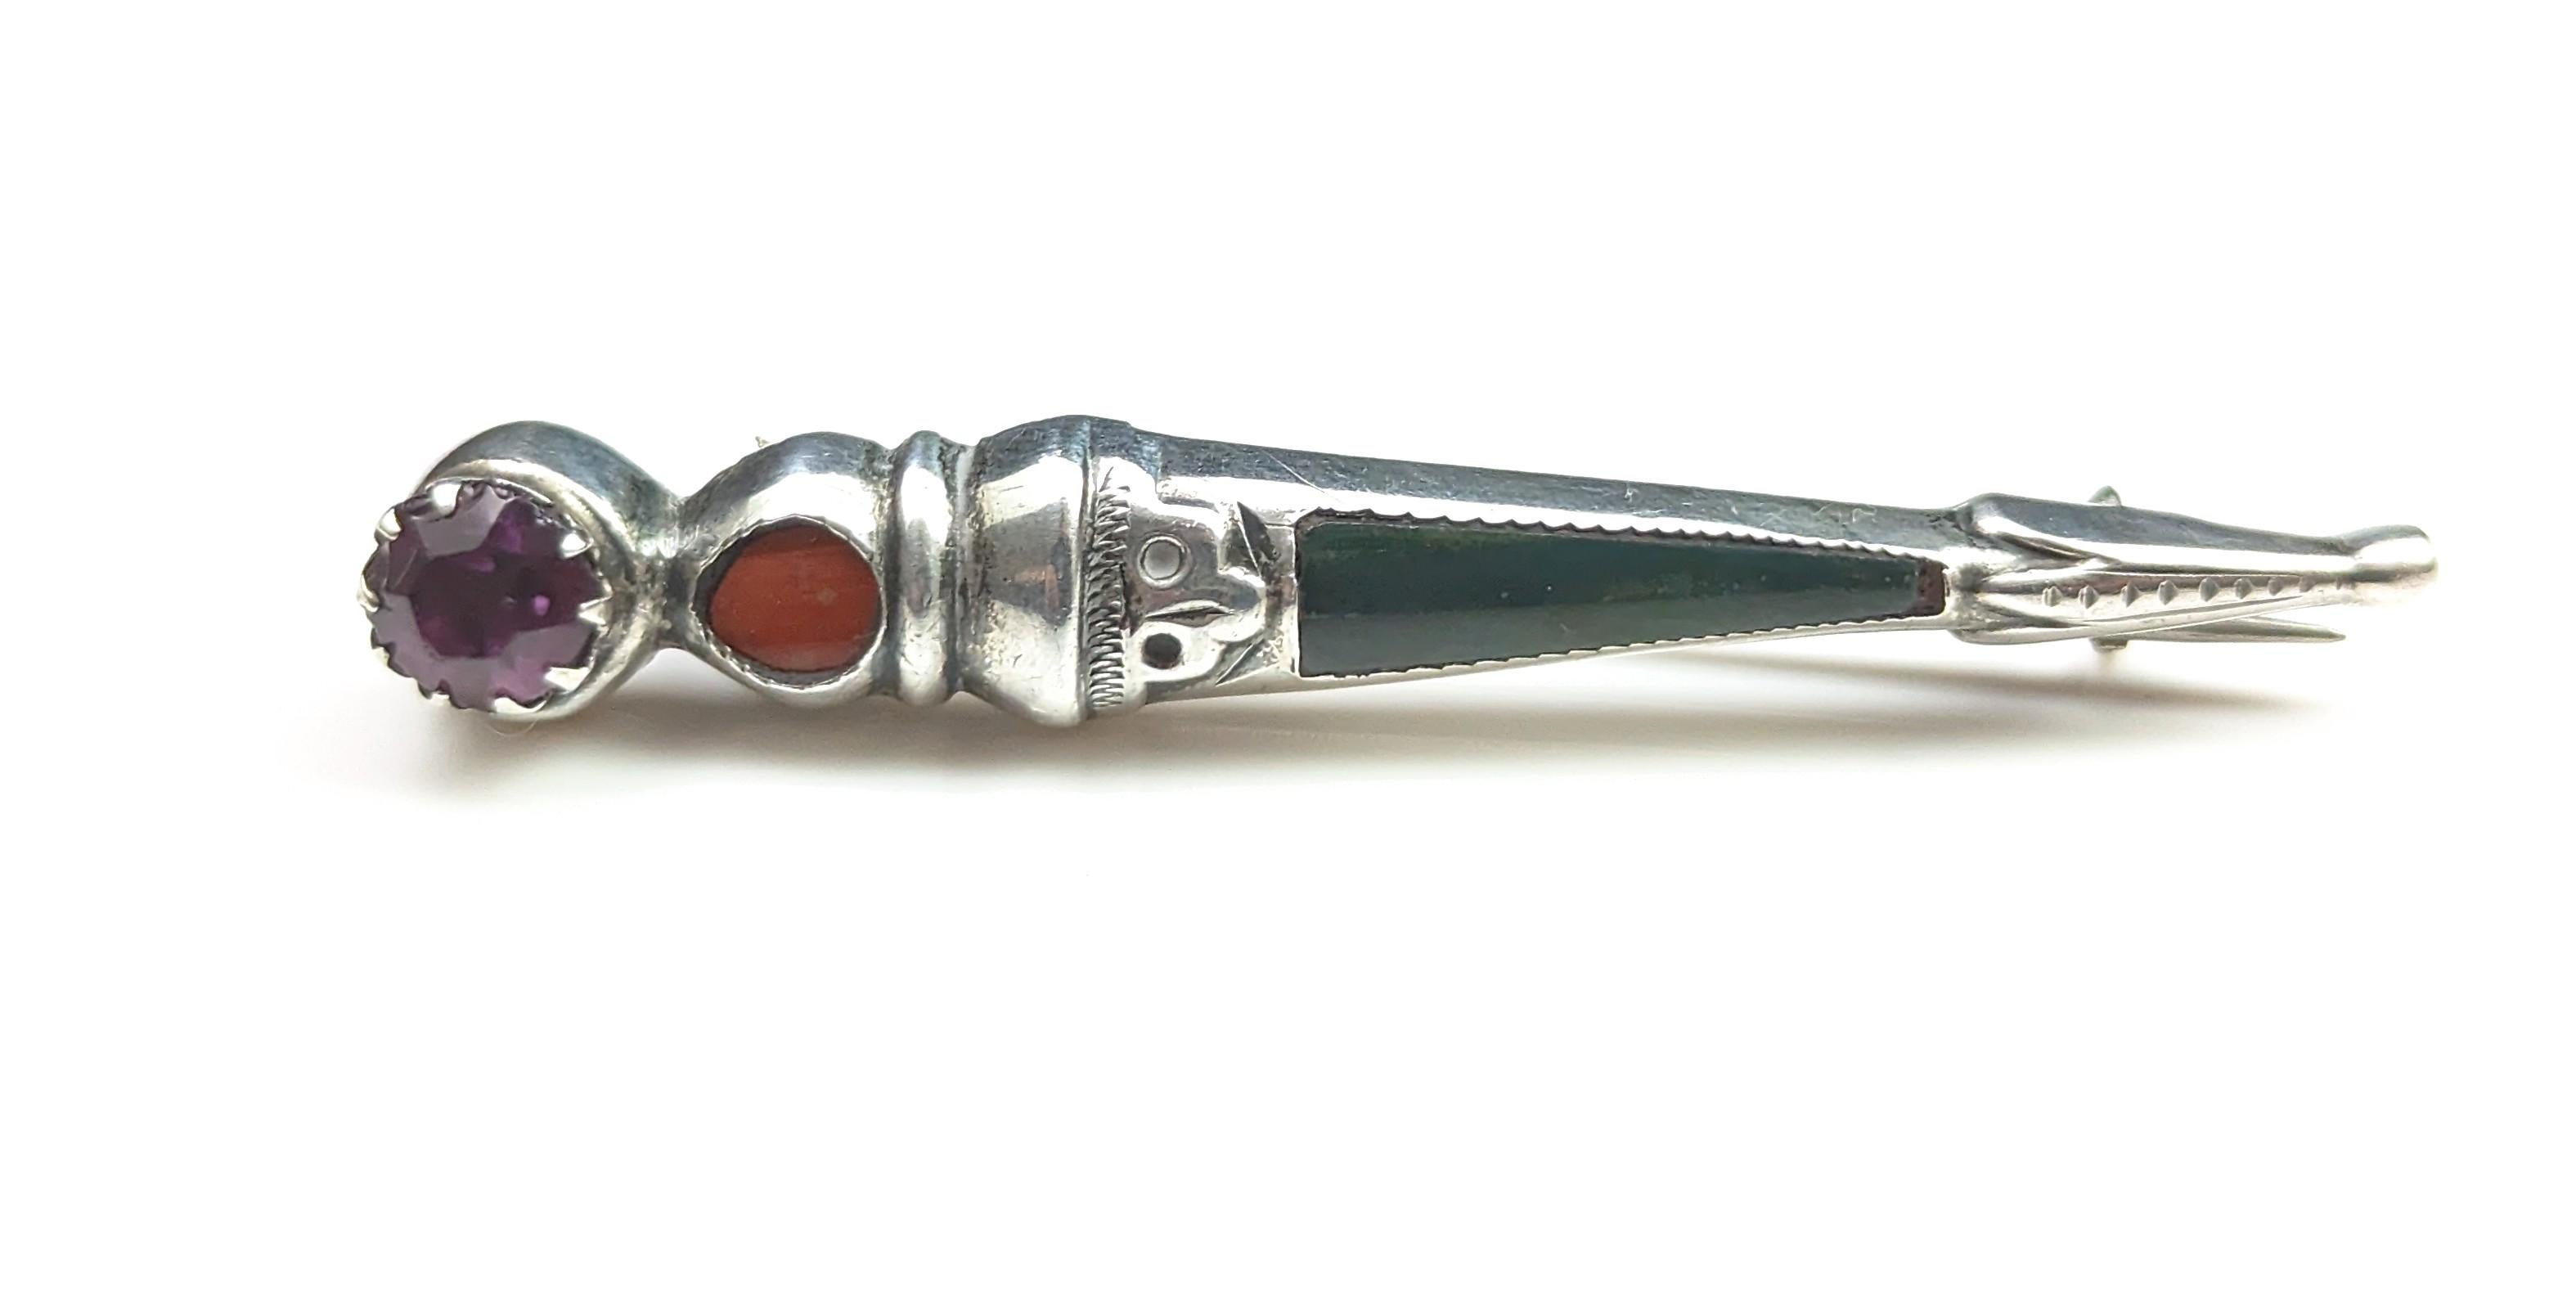 An attractive antique, Scottish agate and Silver Dirk brooch.

It has an amethyst paste stone to the top and a single circular red Jasper just below, the main length of the Dirk is set with dark green Bloodstone.

The brooch is crafted in cool